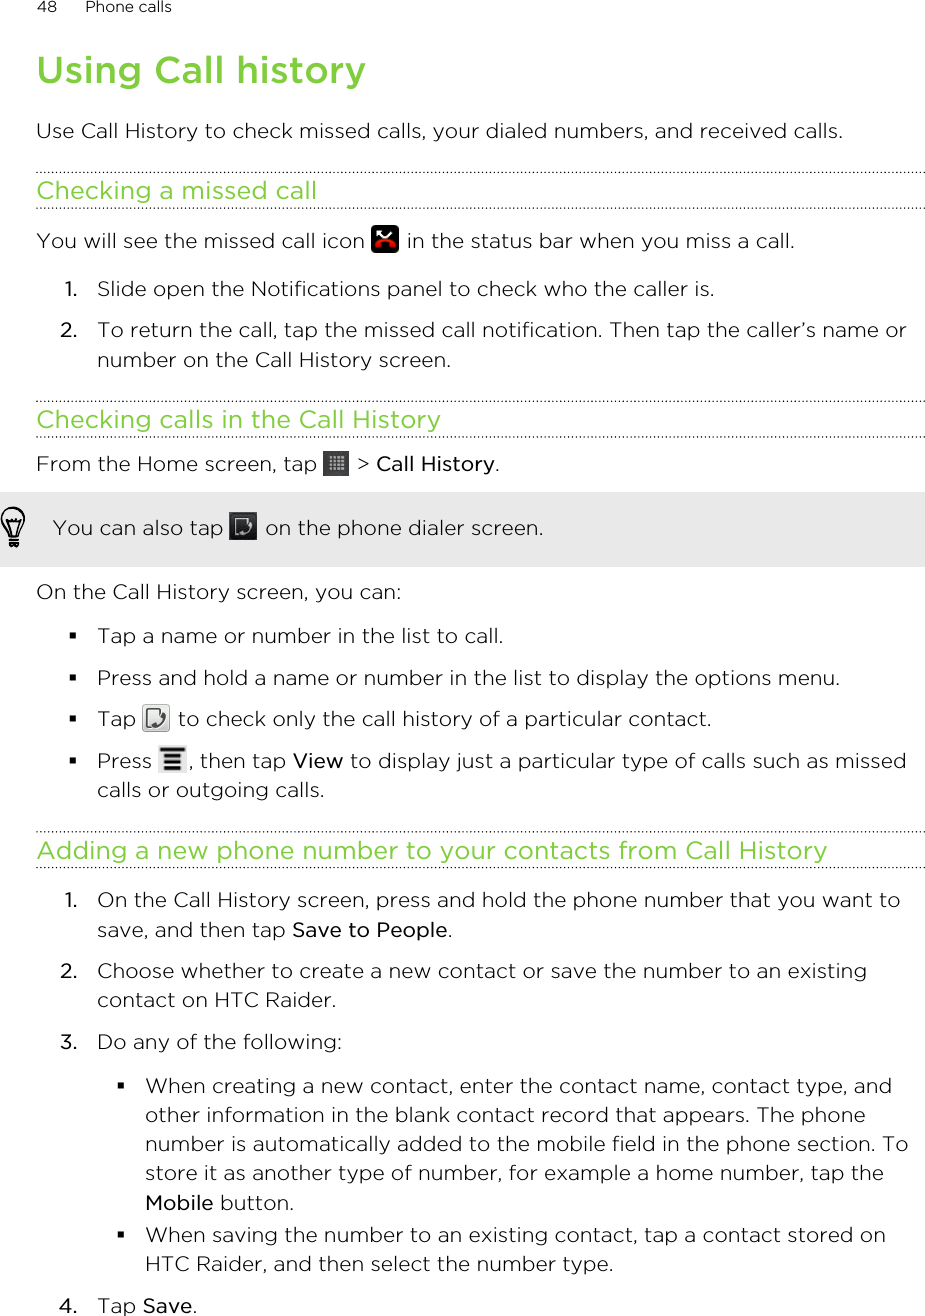 Using Call historyUse Call History to check missed calls, your dialed numbers, and received calls.Checking a missed callYou will see the missed call icon   in the status bar when you miss a call.1. Slide open the Notifications panel to check who the caller is.2. To return the call, tap the missed call notification. Then tap the caller’s name ornumber on the Call History screen.Checking calls in the Call HistoryFrom the Home screen, tap   &gt; Call History. You can also tap   on the phone dialer screen.On the Call History screen, you can:§Tap a name or number in the list to call.§Press and hold a name or number in the list to display the options menu.§Tap   to check only the call history of a particular contact.§Press  , then tap View to display just a particular type of calls such as missedcalls or outgoing calls.Adding a new phone number to your contacts from Call History1. On the Call History screen, press and hold the phone number that you want tosave, and then tap Save to People.2. Choose whether to create a new contact or save the number to an existingcontact on HTC Raider.3. Do any of the following:§When creating a new contact, enter the contact name, contact type, andother information in the blank contact record that appears. The phonenumber is automatically added to the mobile field in the phone section. Tostore it as another type of number, for example a home number, tap theMobile button.§When saving the number to an existing contact, tap a contact stored onHTC Raider, and then select the number type.4. Tap Save.48 Phone calls